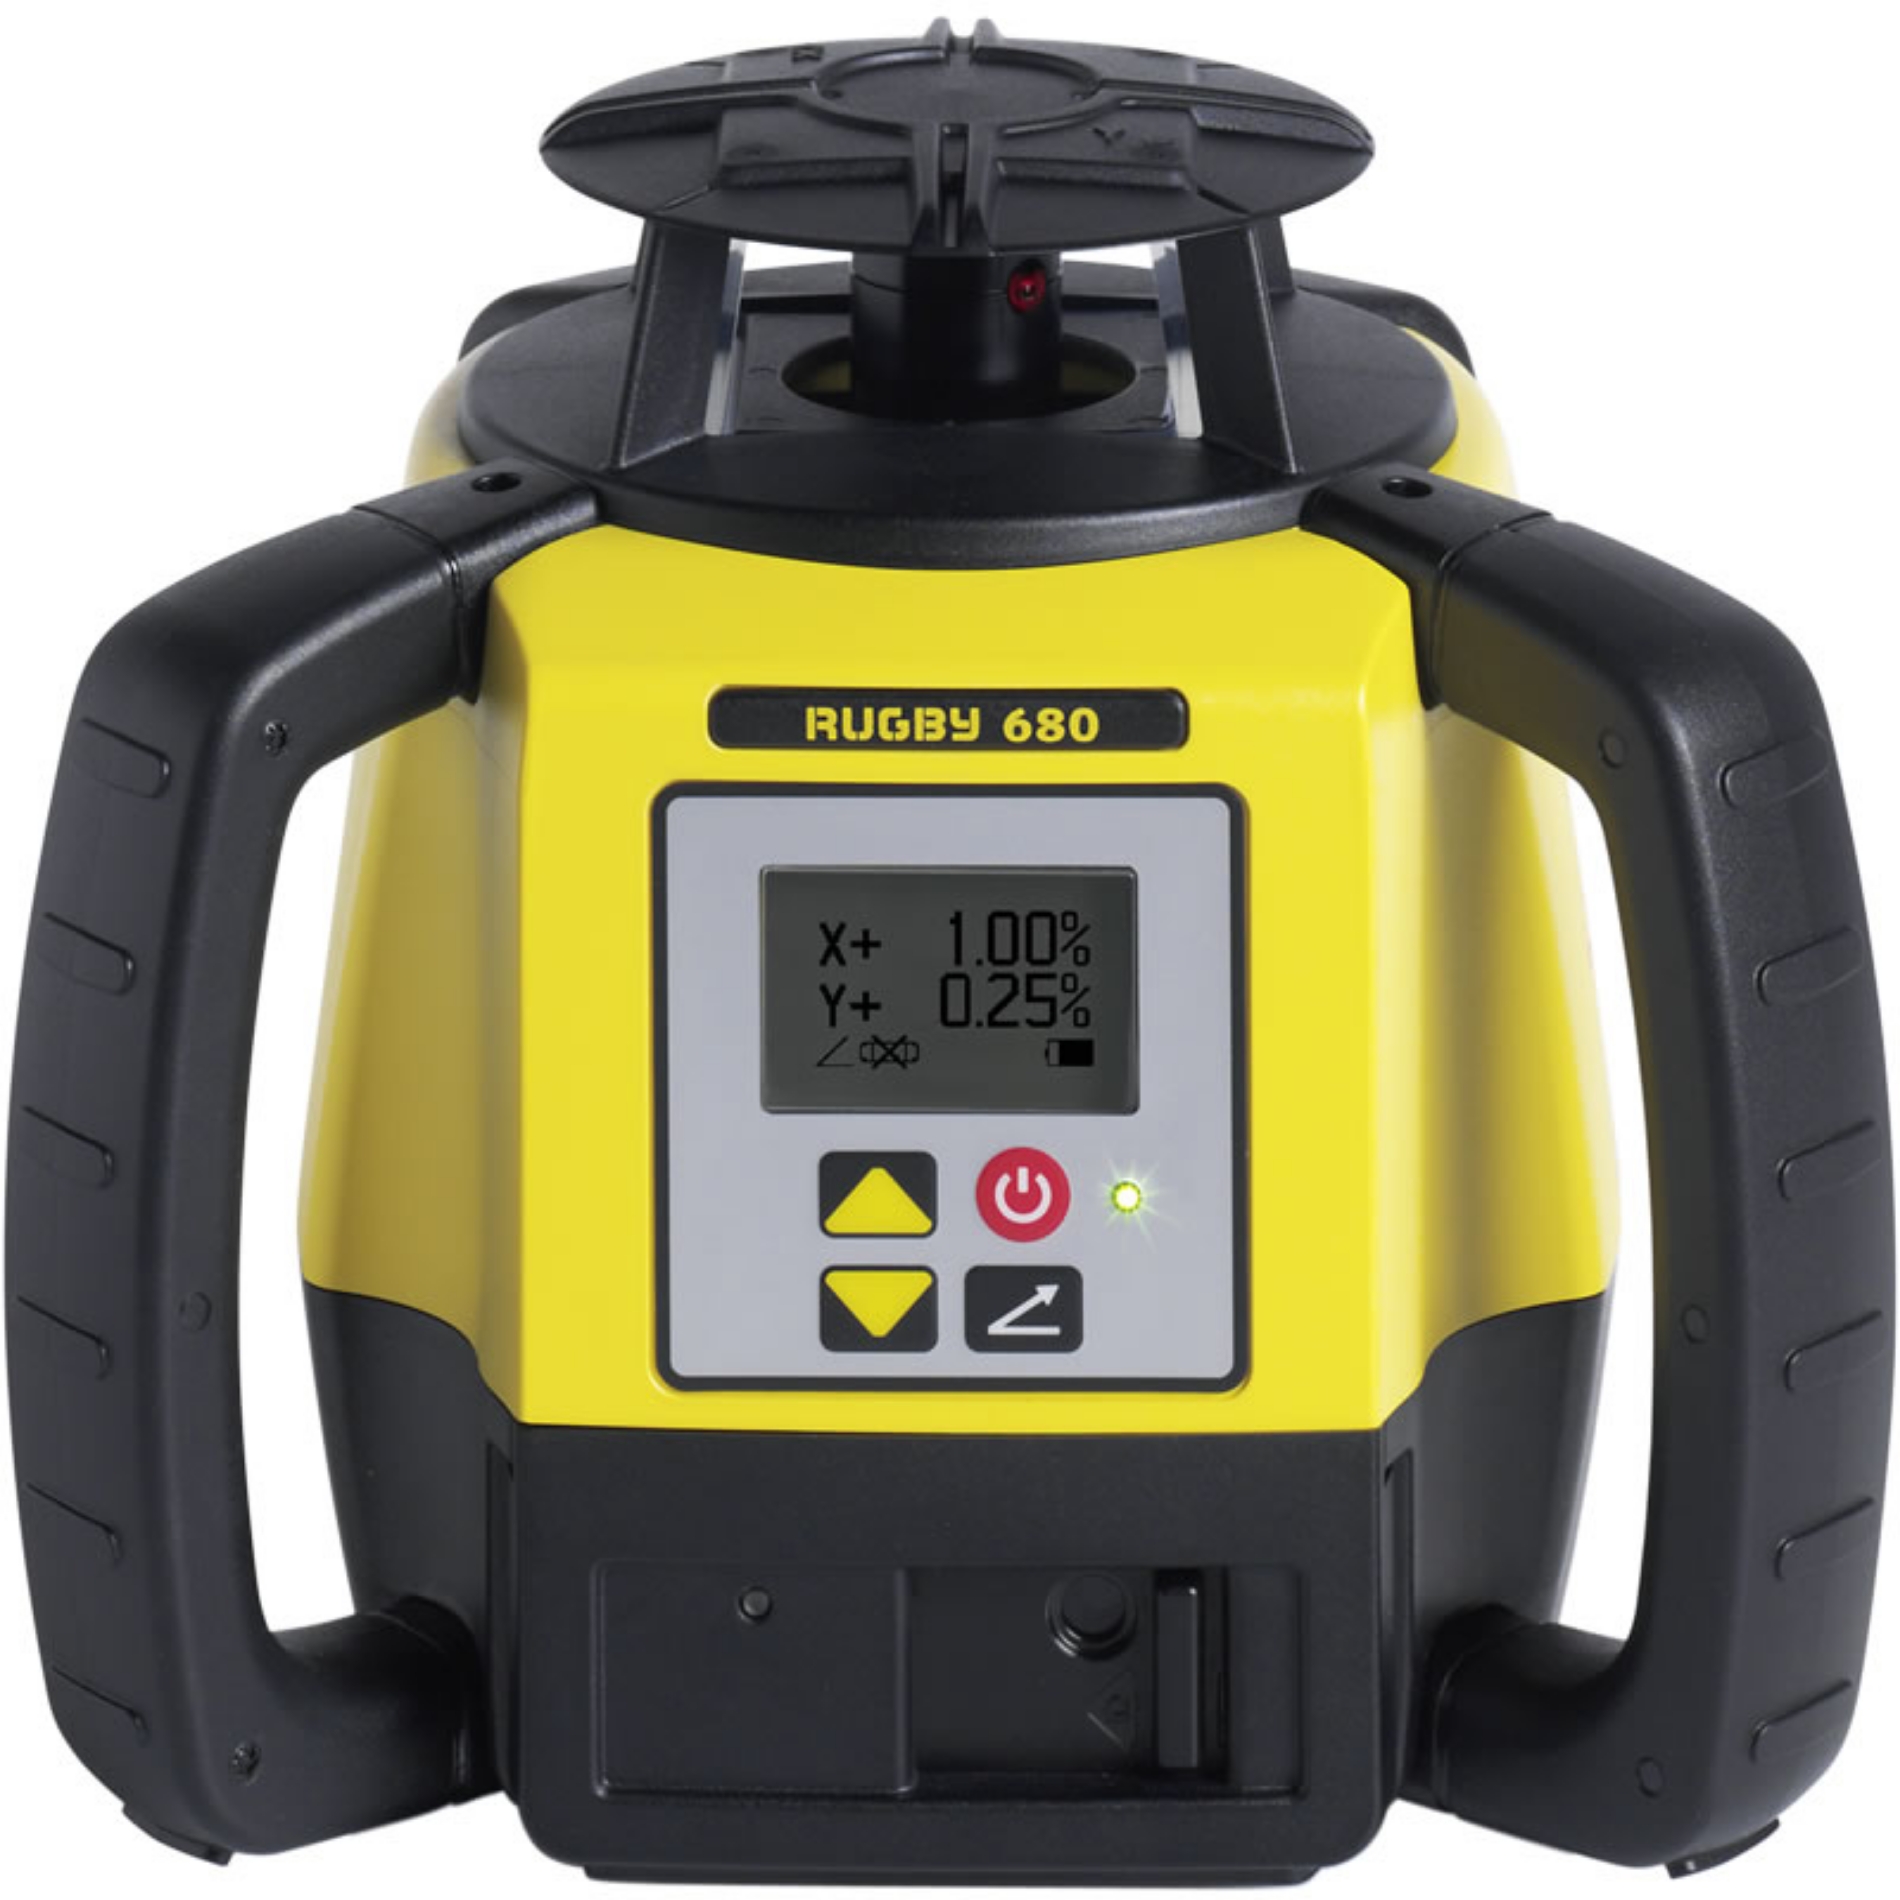 Picture of Leica Rugby 680 Laser Level Bundle 2